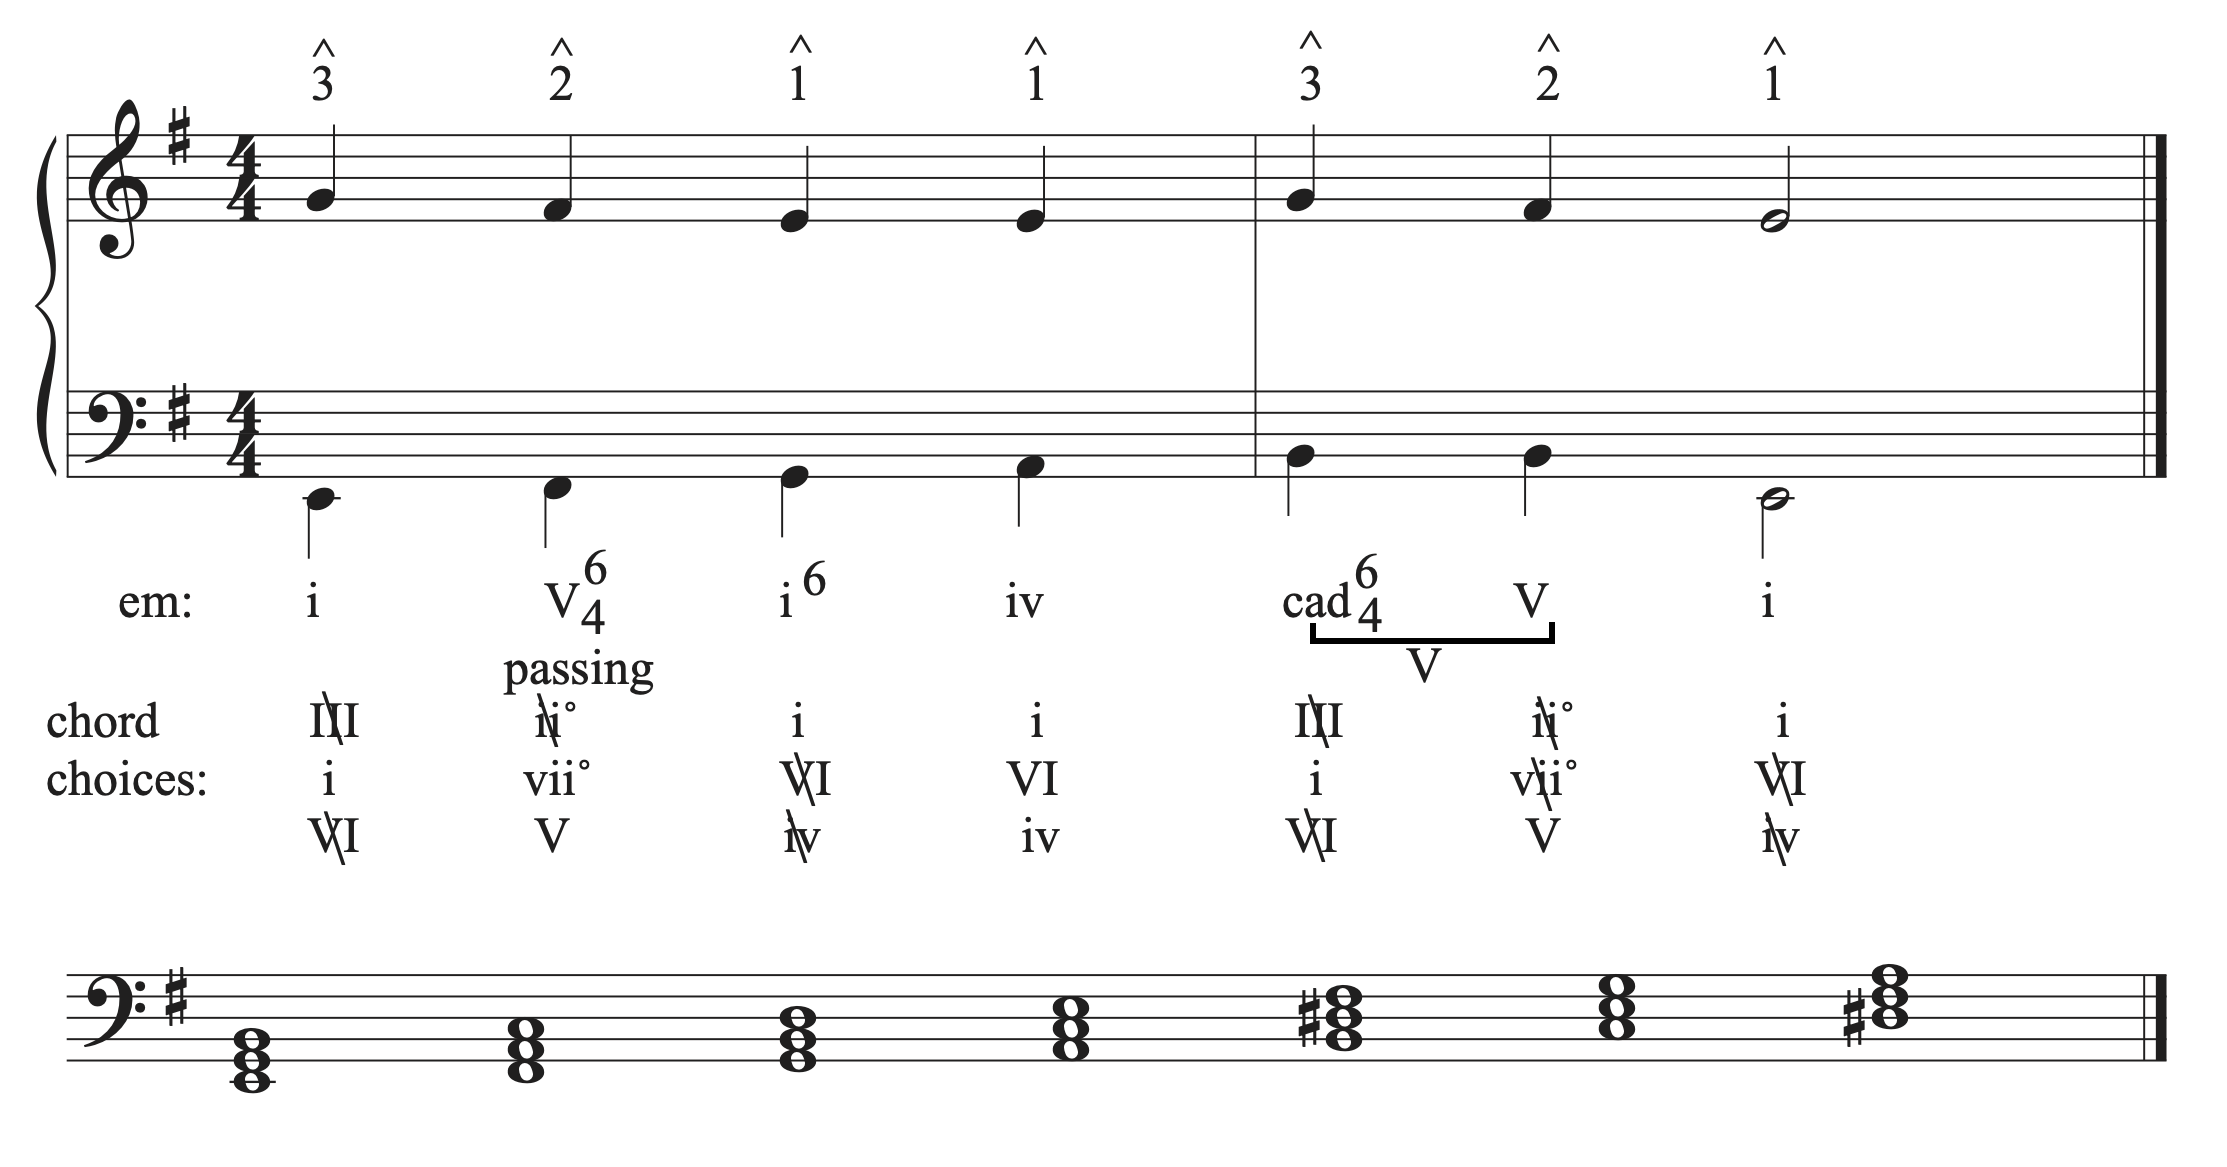 The musical example in G major with the bass line added.